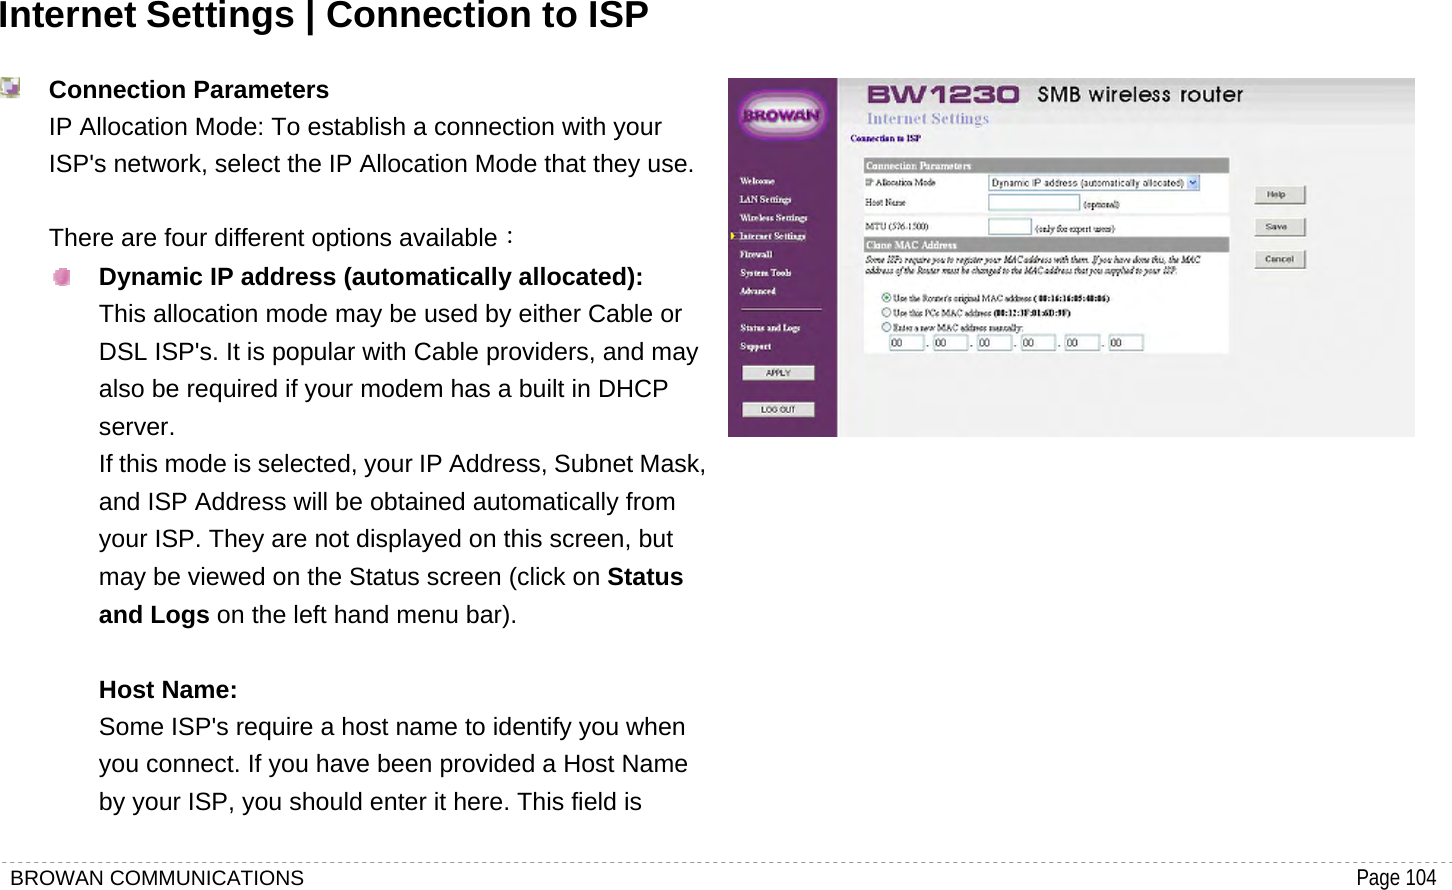 BROWAN COMMUNICATIONS                                                                                           Page 104  Internet Settings | Connection to ISP  Connection Parameters IP Allocation Mode: To establish a connection with your ISP&apos;s network, select the IP Allocation Mode that they use.  There are four different options available：  Dynamic IP address (automatically allocated): This allocation mode may be used by either Cable or DSL ISP&apos;s. It is popular with Cable providers, and may also be required if your modem has a built in DHCP server. If this mode is selected, your IP Address, Subnet Mask, and ISP Address will be obtained automatically from your ISP. They are not displayed on this screen, but may be viewed on the Status screen (click on Status and Logs on the left hand menu bar).  Host Name: Some ISP&apos;s require a host name to identify you when you connect. If you have been provided a Host Name by your ISP, you should enter it here. This field is            